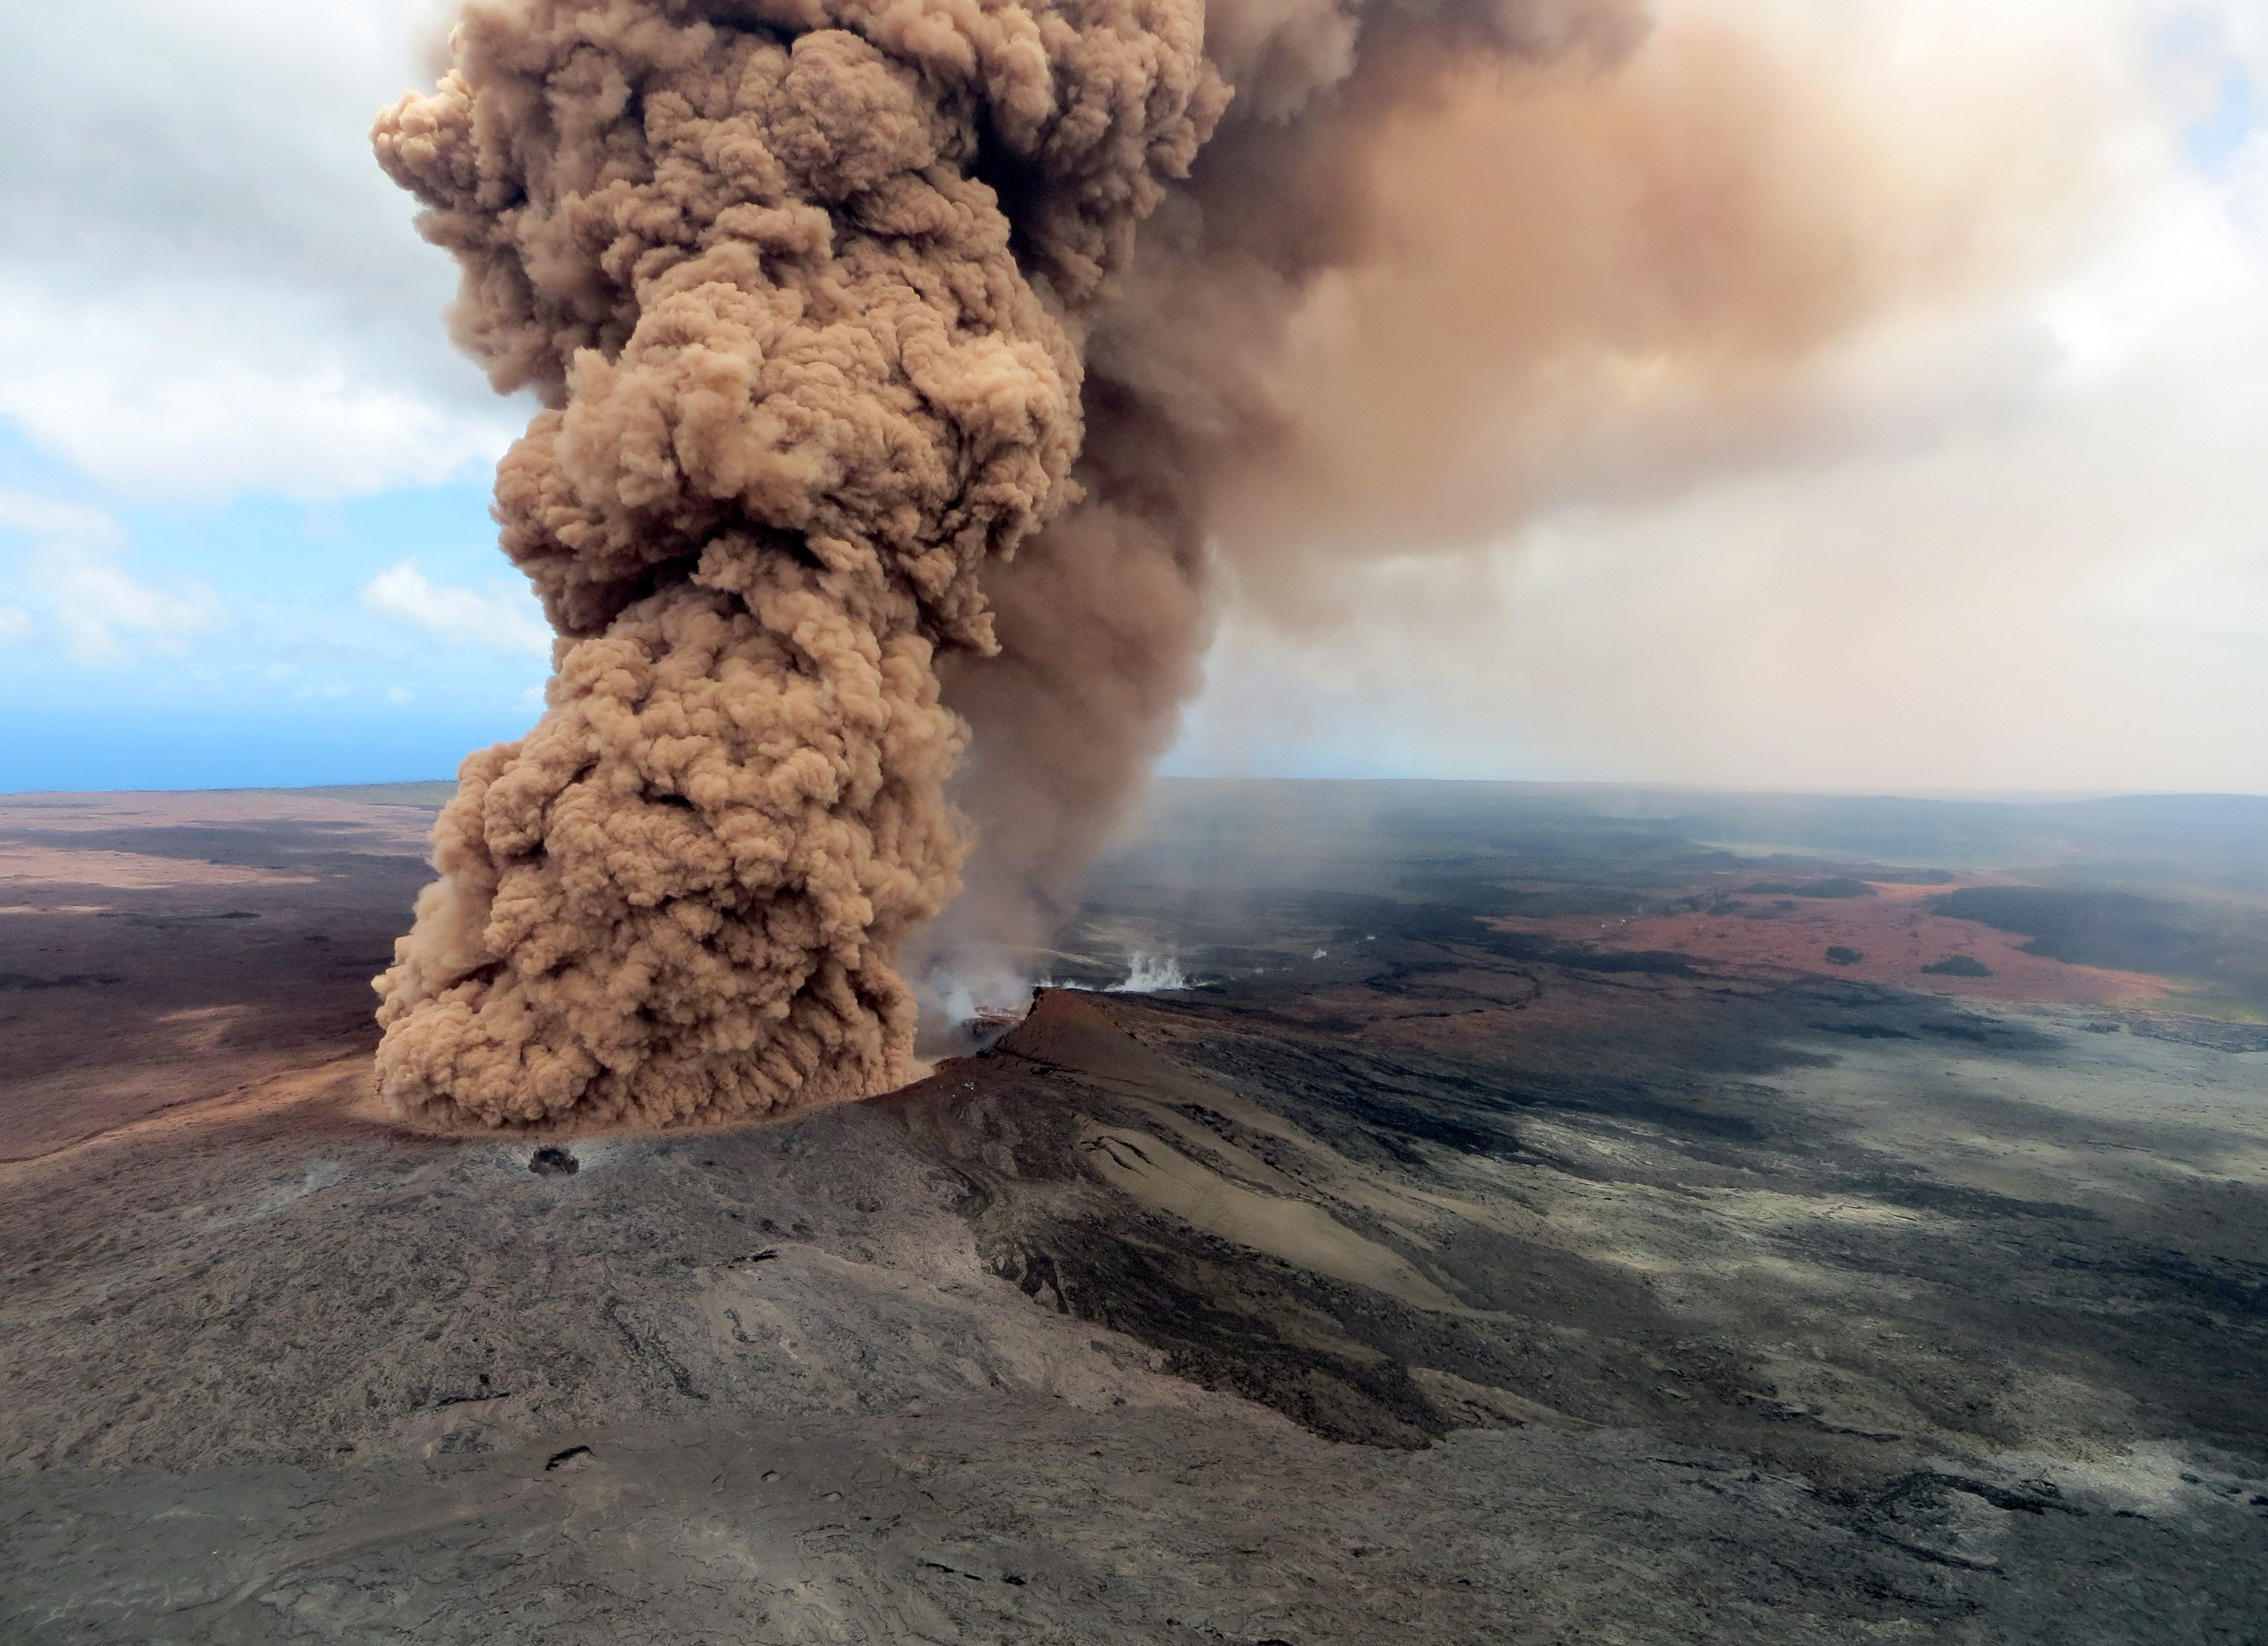 Hawaii Volcano Eruption Caught on Time Lapse Video